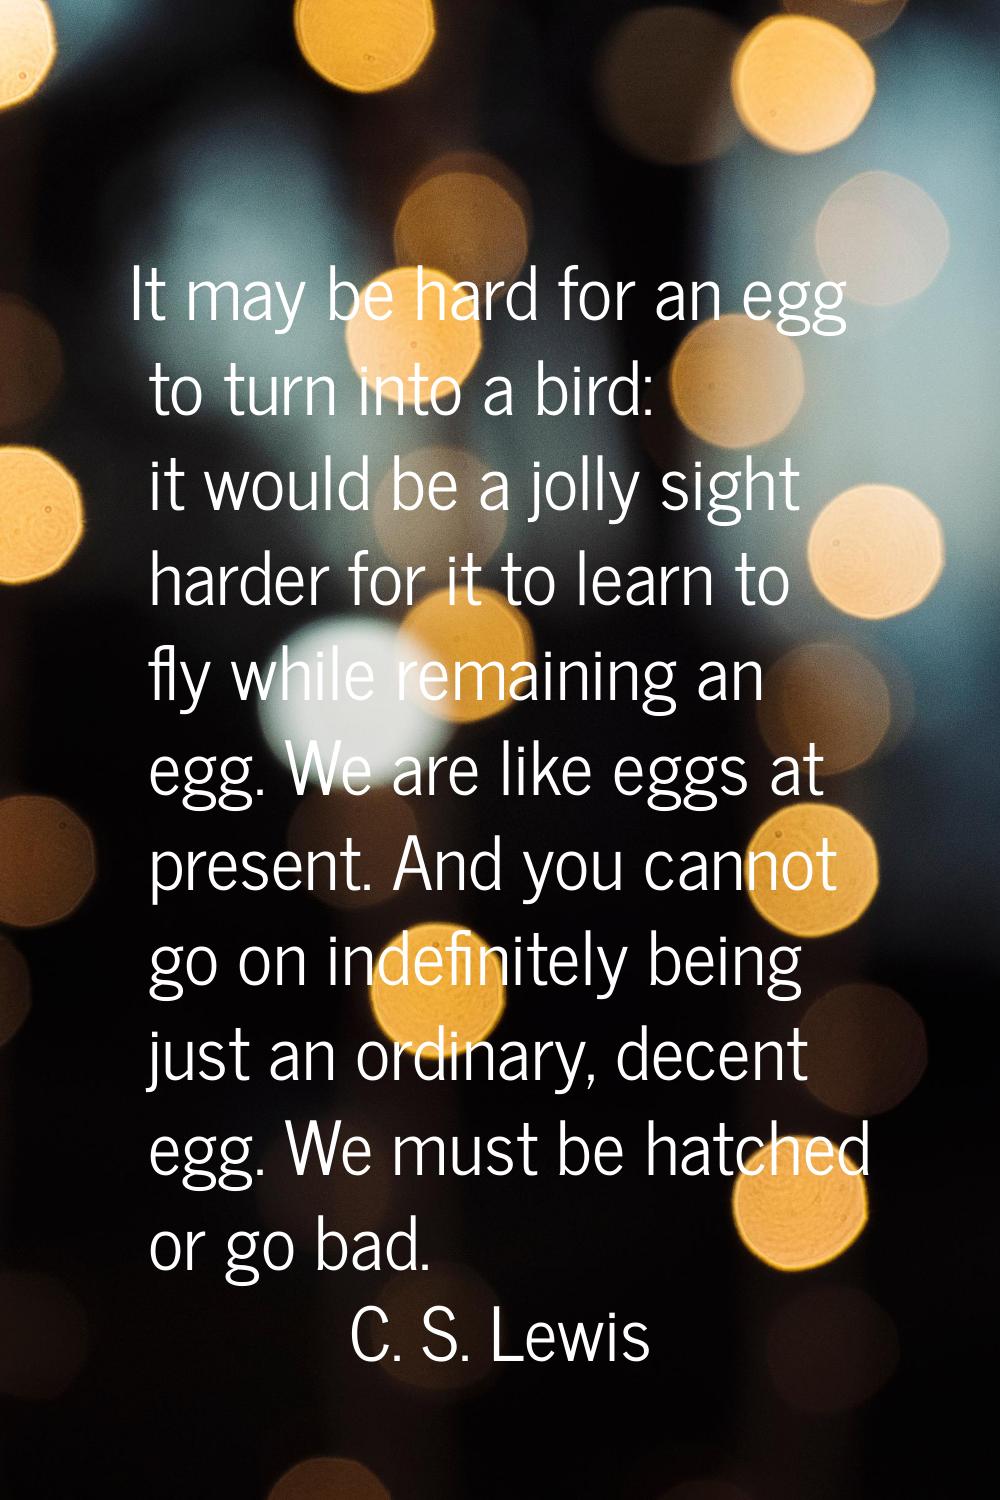 It may be hard for an egg to turn into a bird: it would be a jolly sight harder for it to learn to 